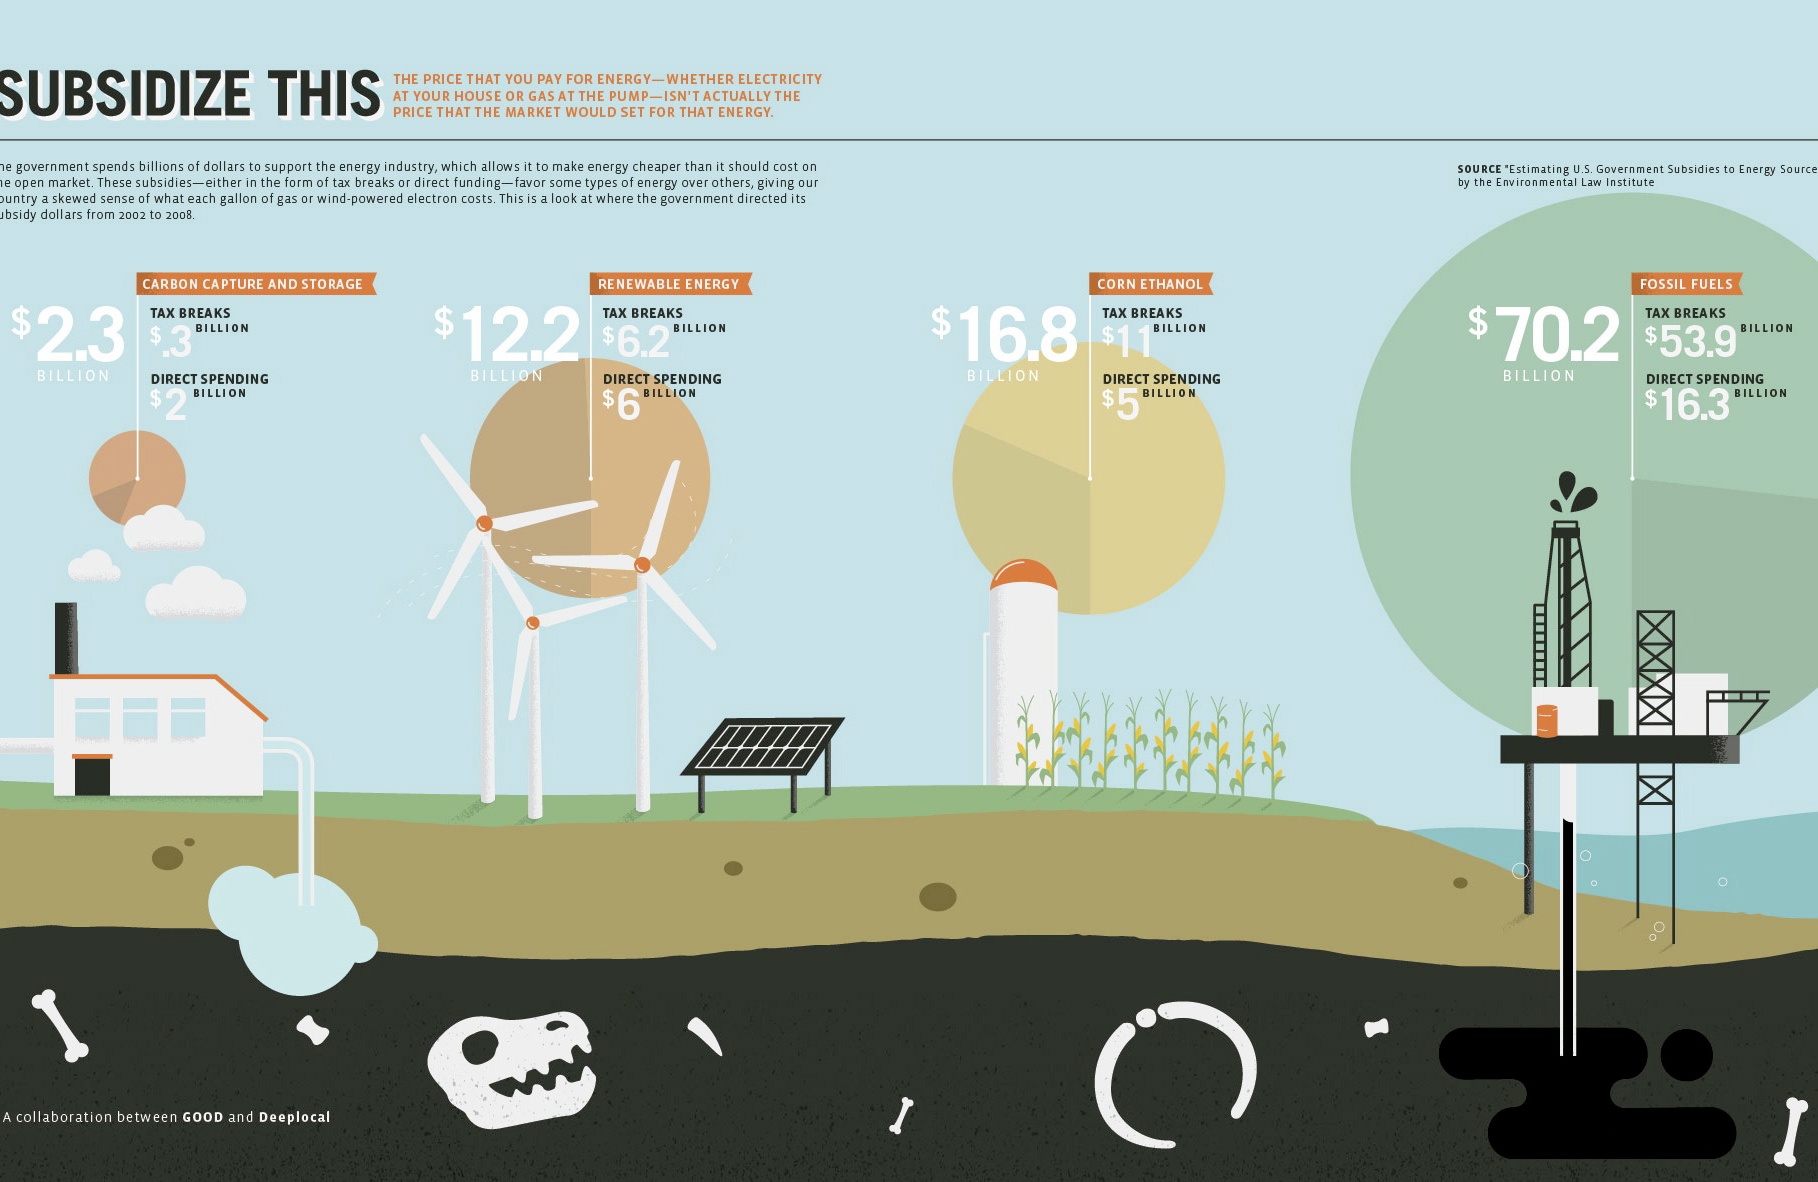 Infographic Clearly Shows How Little Government Support Clean Energy's Received Compared to Fossil Fuels